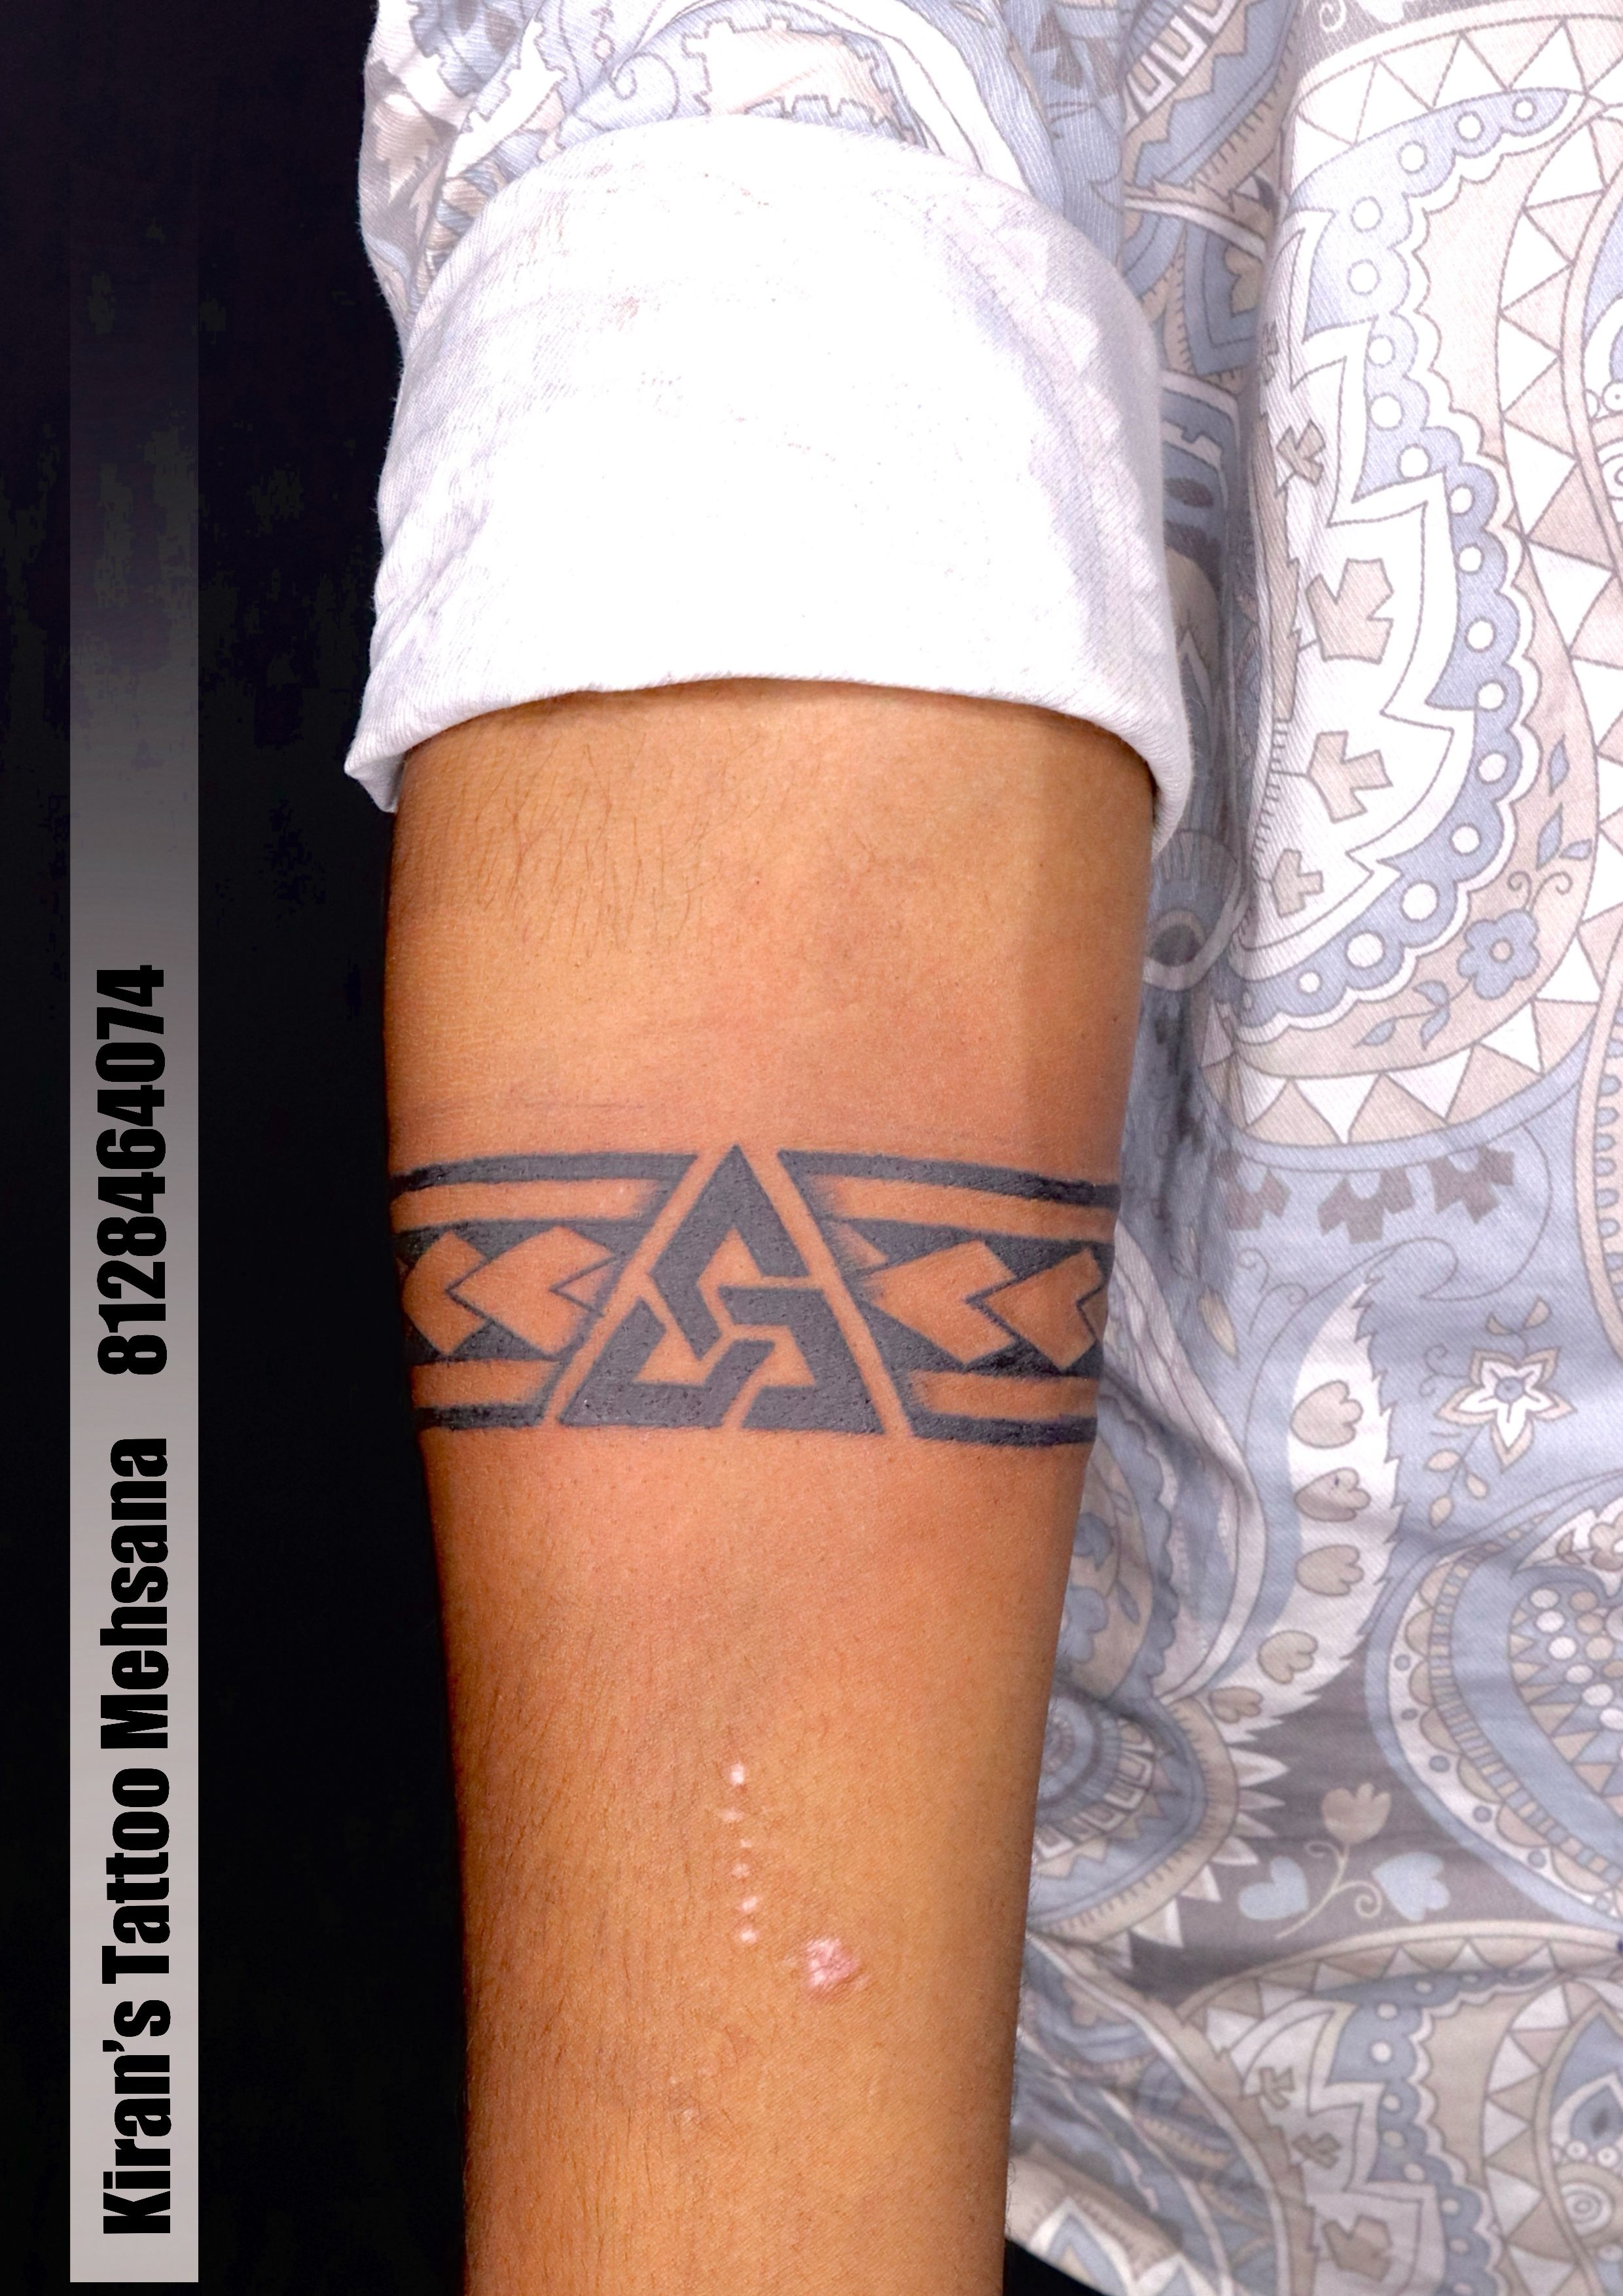 Triangle forearm band tattoo at Aman tattoo arts 9078999135 Home  appointment available #amantattooarts #armbandtattoos  #armbandtattoodesign... | By Aman Tattoo ArtsFacebook